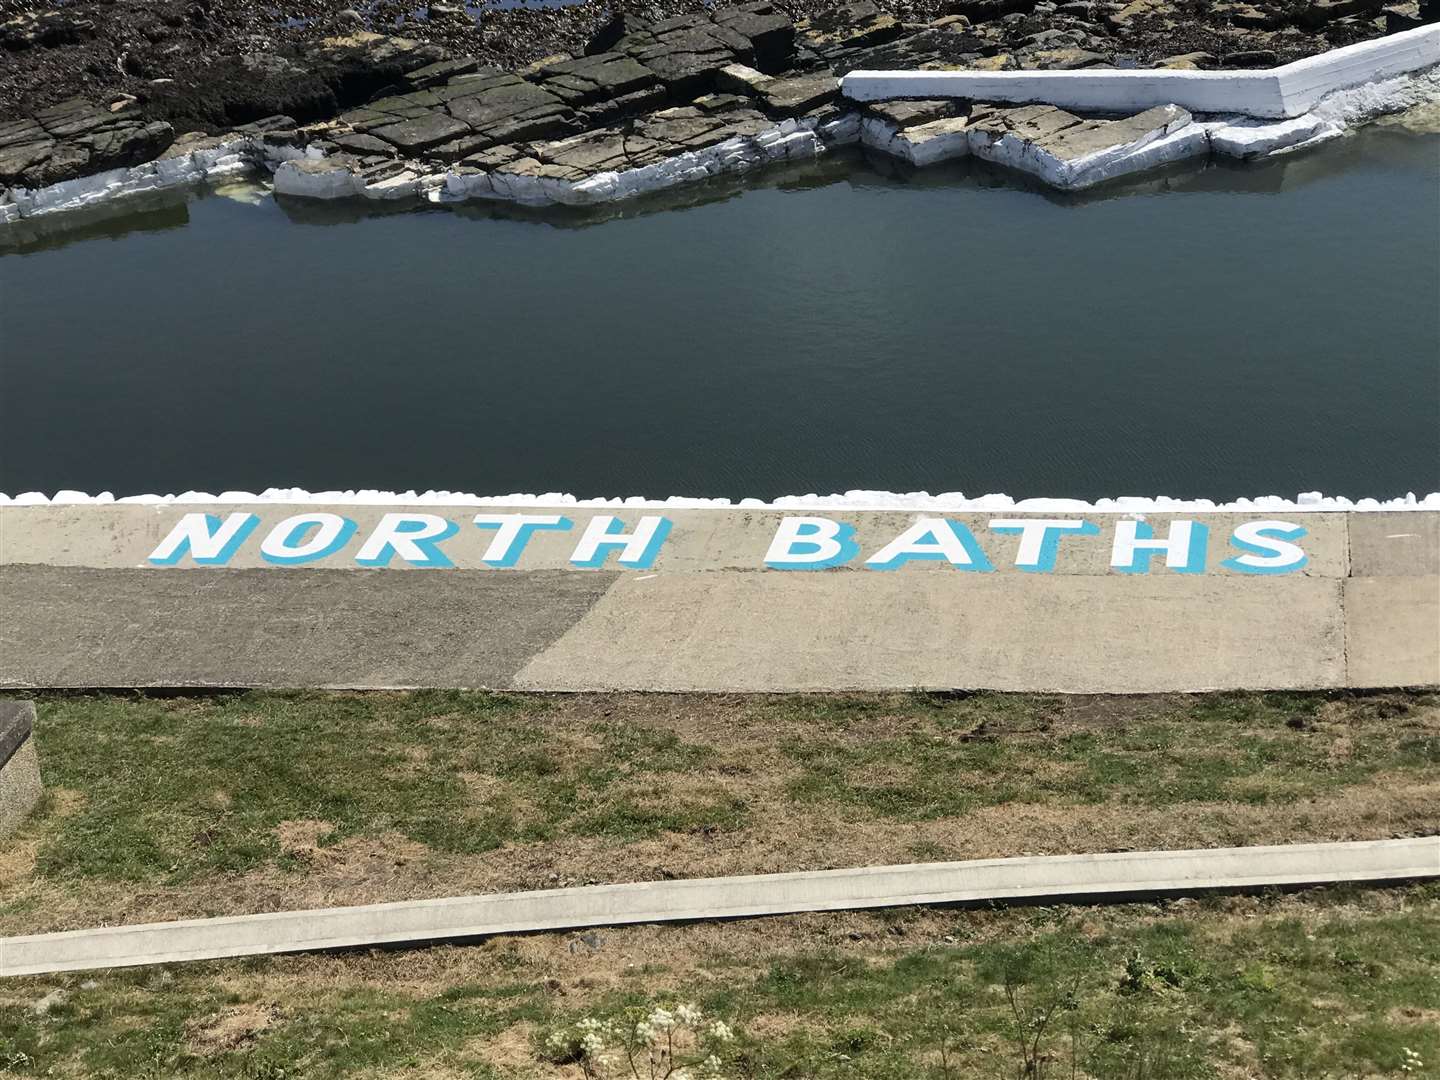 The North Baths looking amazing with the new sign painted by Alex Paterson.